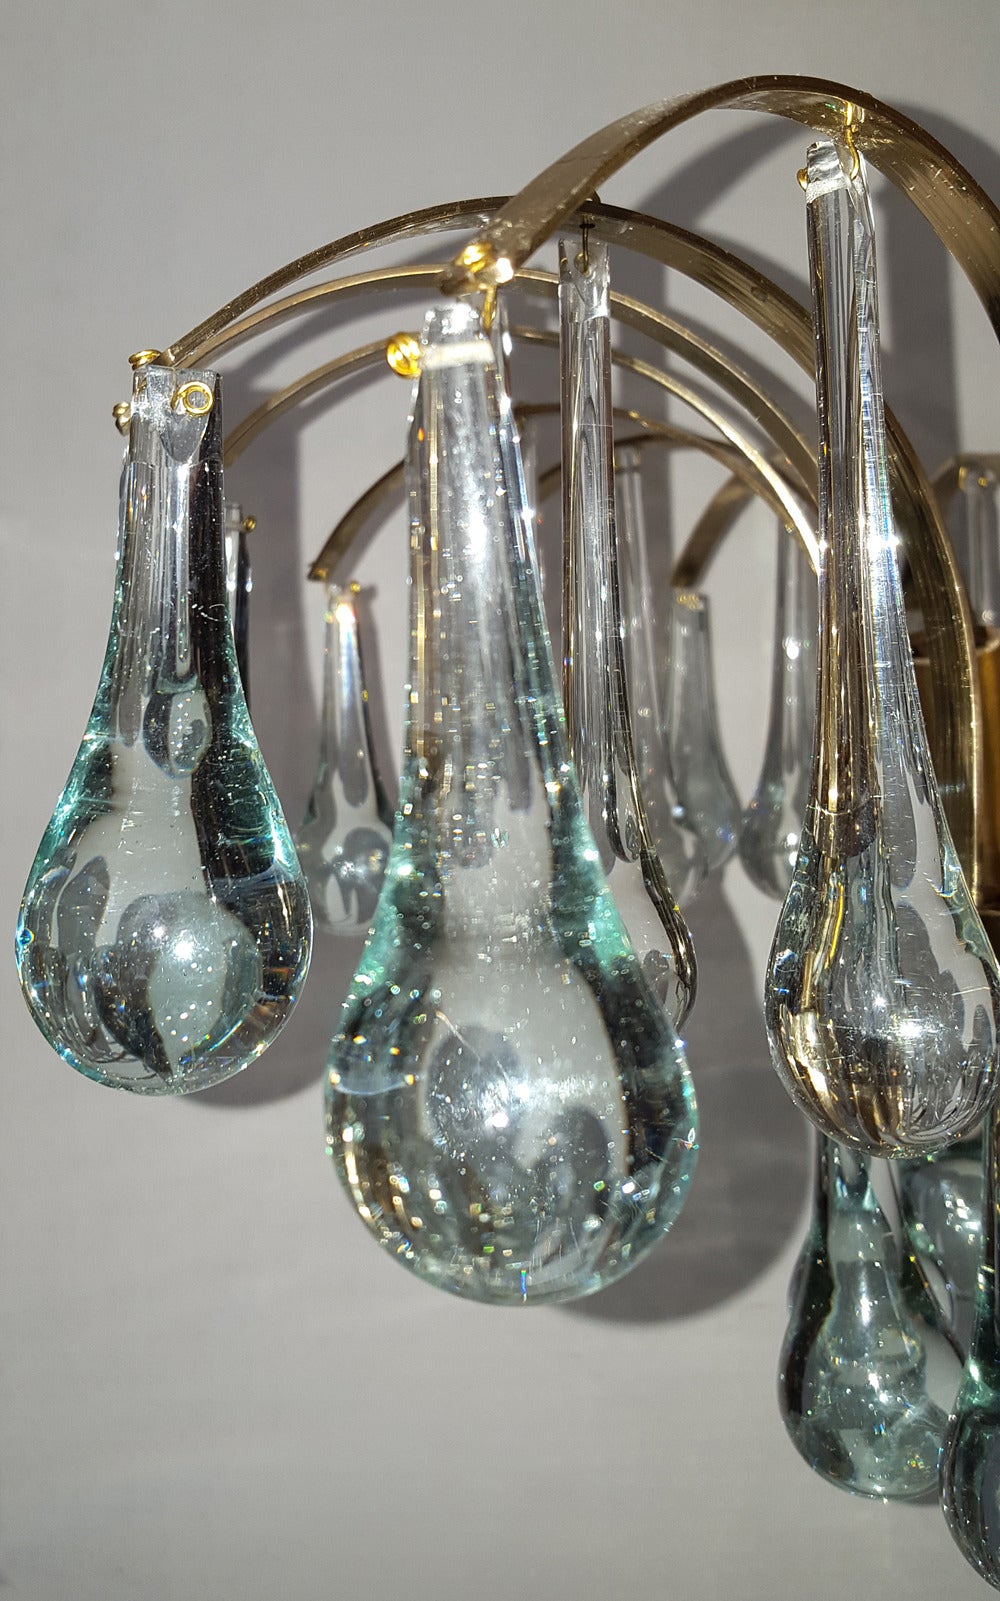 A set of twelve circa 1960s Italian moderne-style flush-mounted light fixtures with glass drops and four interior candelabra lights each. Sold individually.

Measurements:
Diameter 17